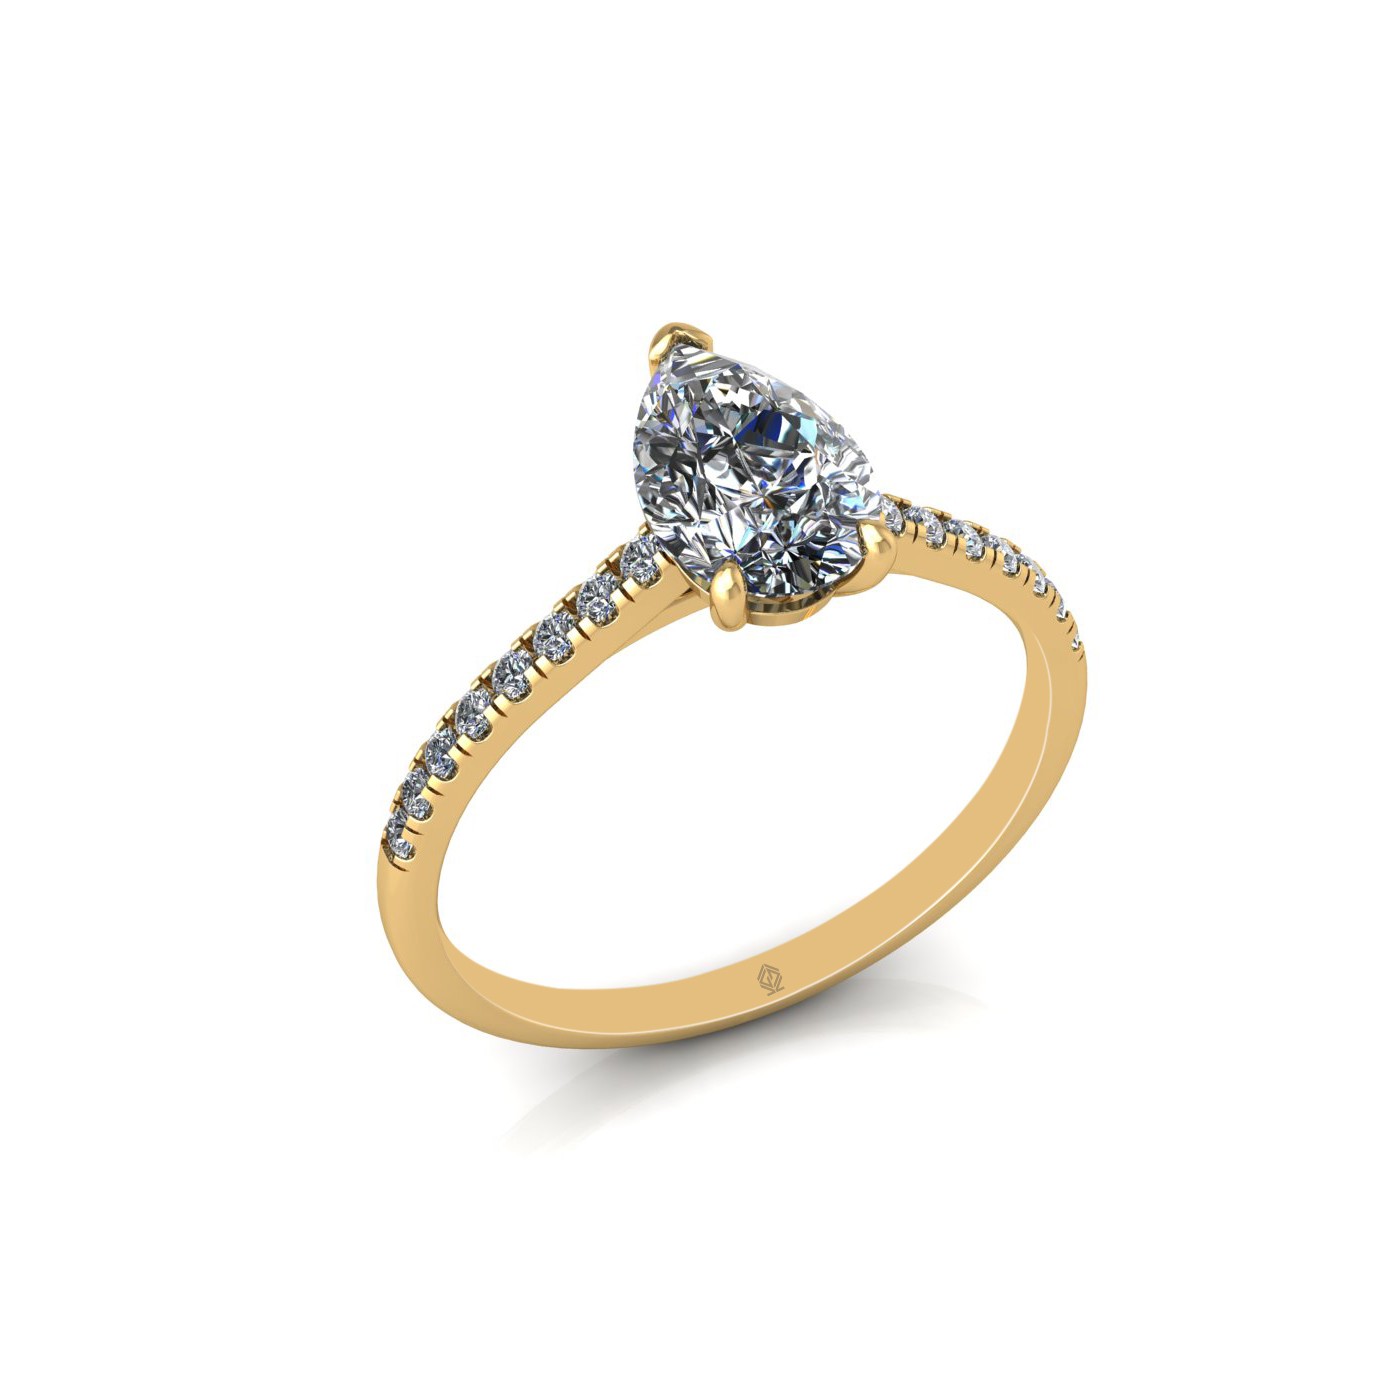 18k yellow gold 1.0ct 3 prongs pear diamond engagement ring with whisper thin pavÉ set band